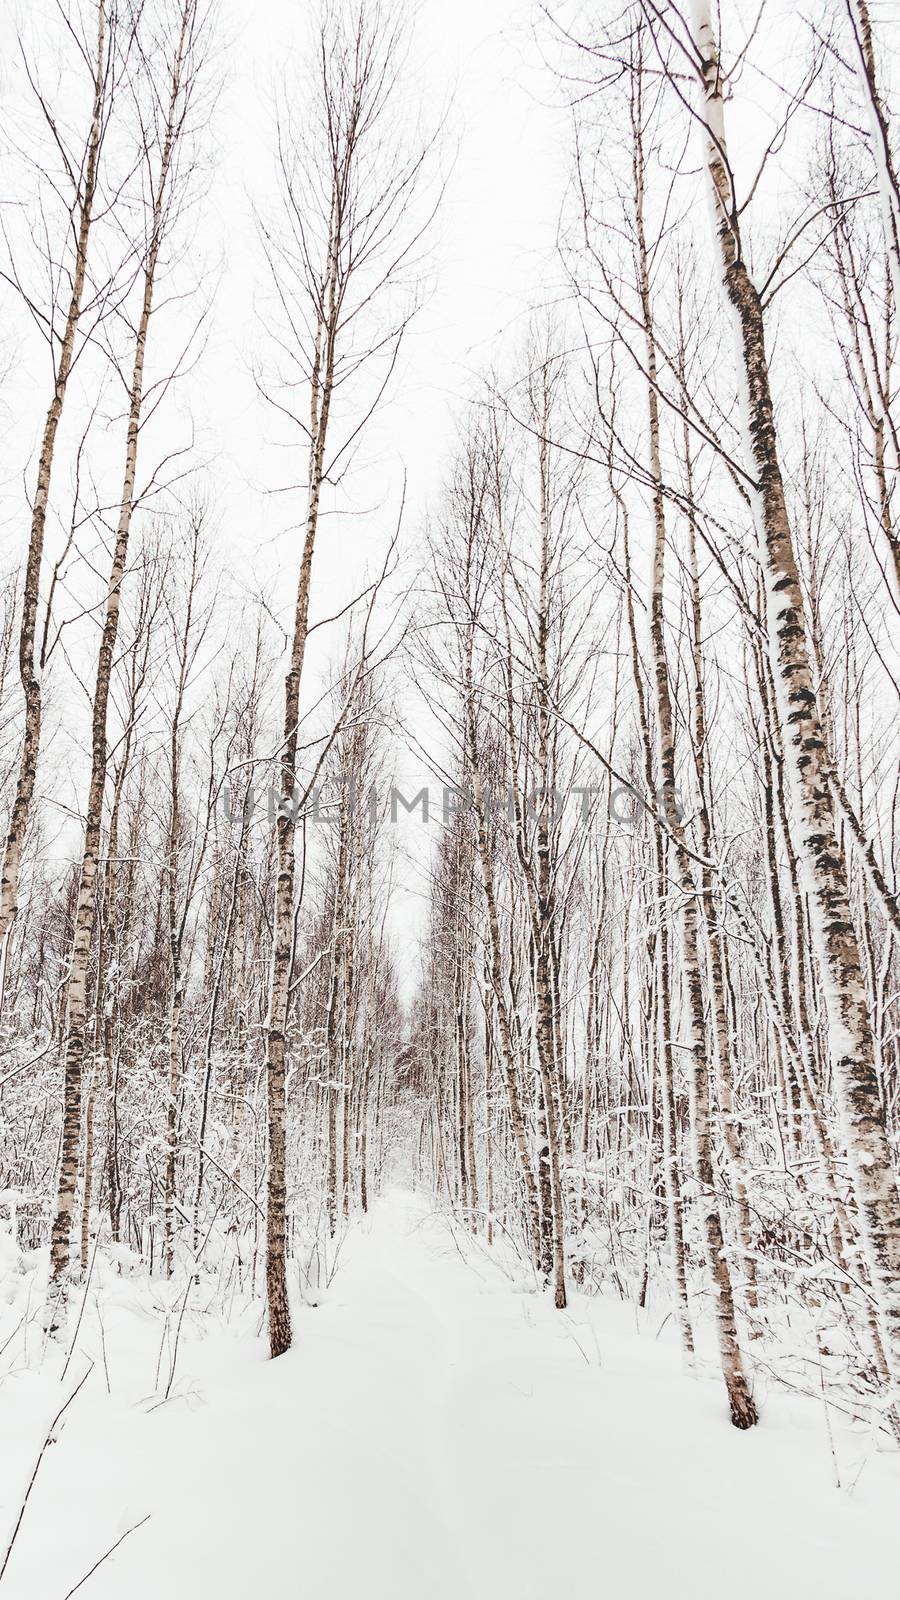 Winter forest. Snowy wood. Path between trees. Winter natural background with birch trees.